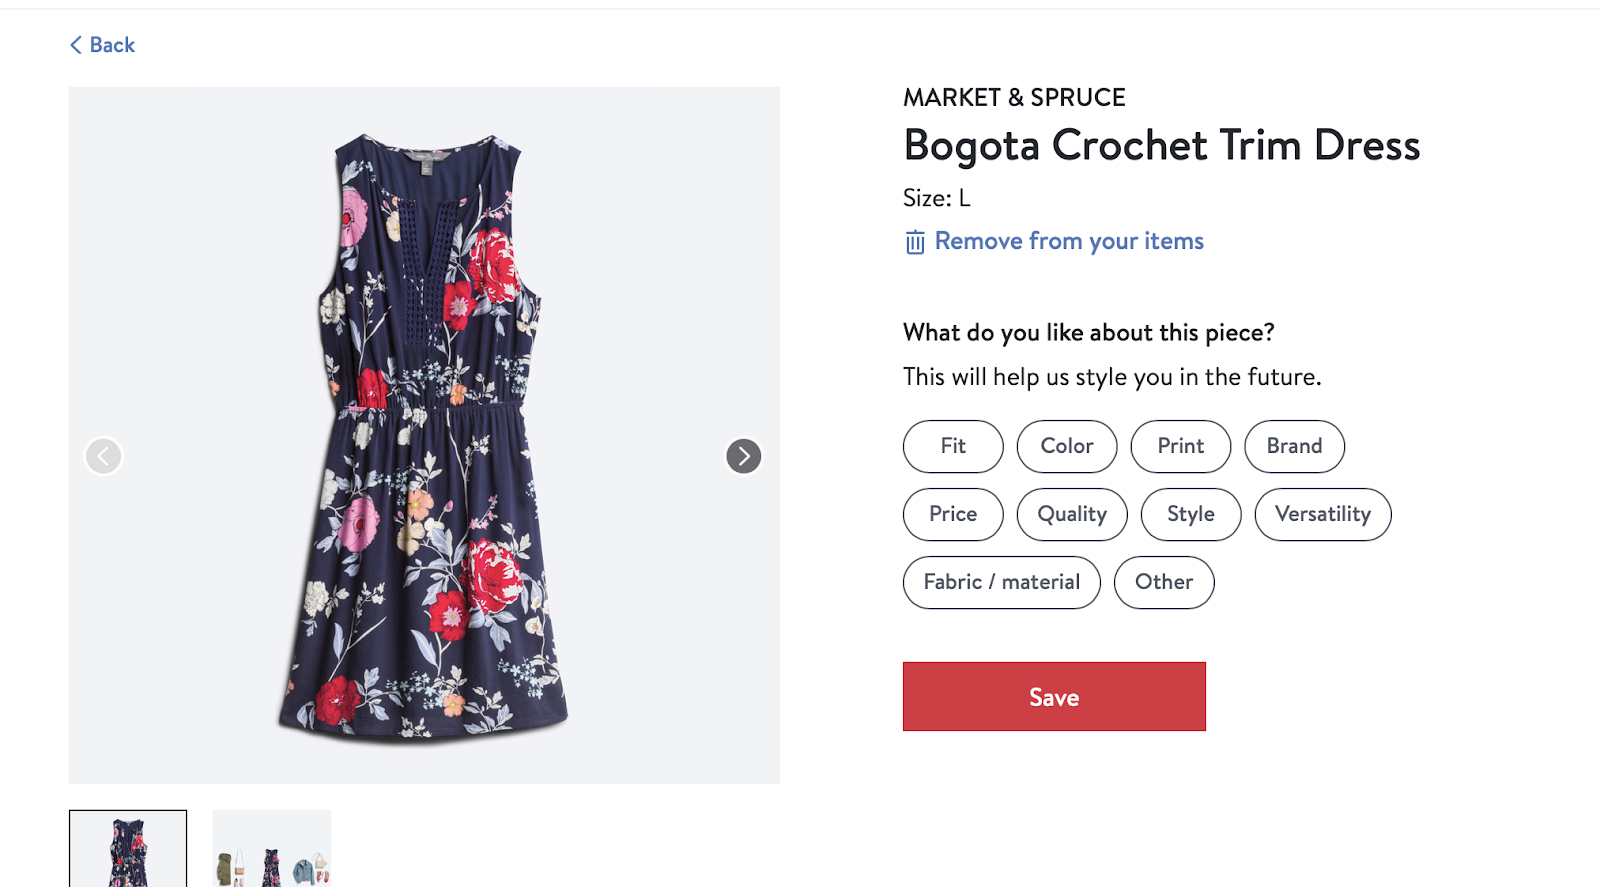 Are Clothing Subscriptions Like Stitch Fix Worth It? - One Woman's ...